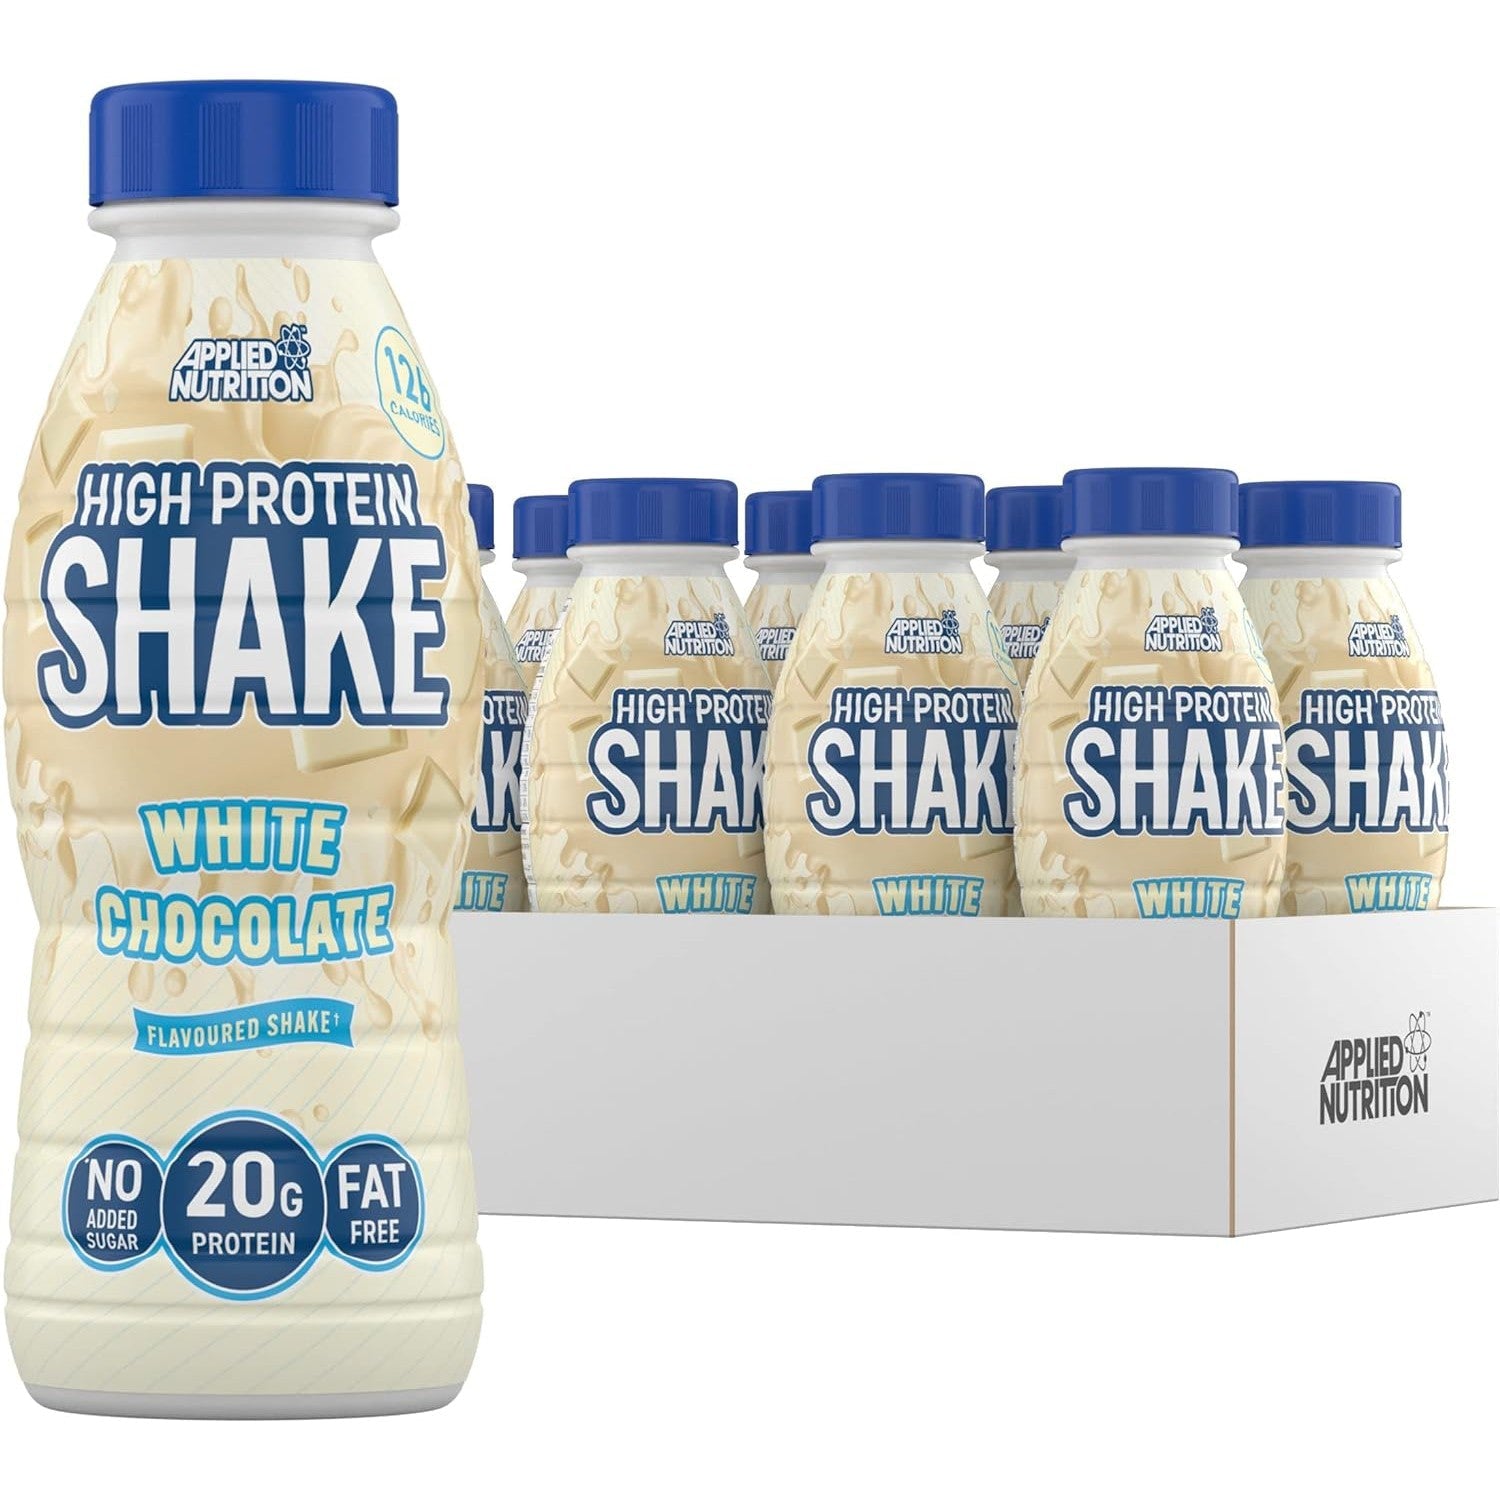 Applied Nutrition High Protein Shake White Chocolate Fat Free No Added Sugar 500ml